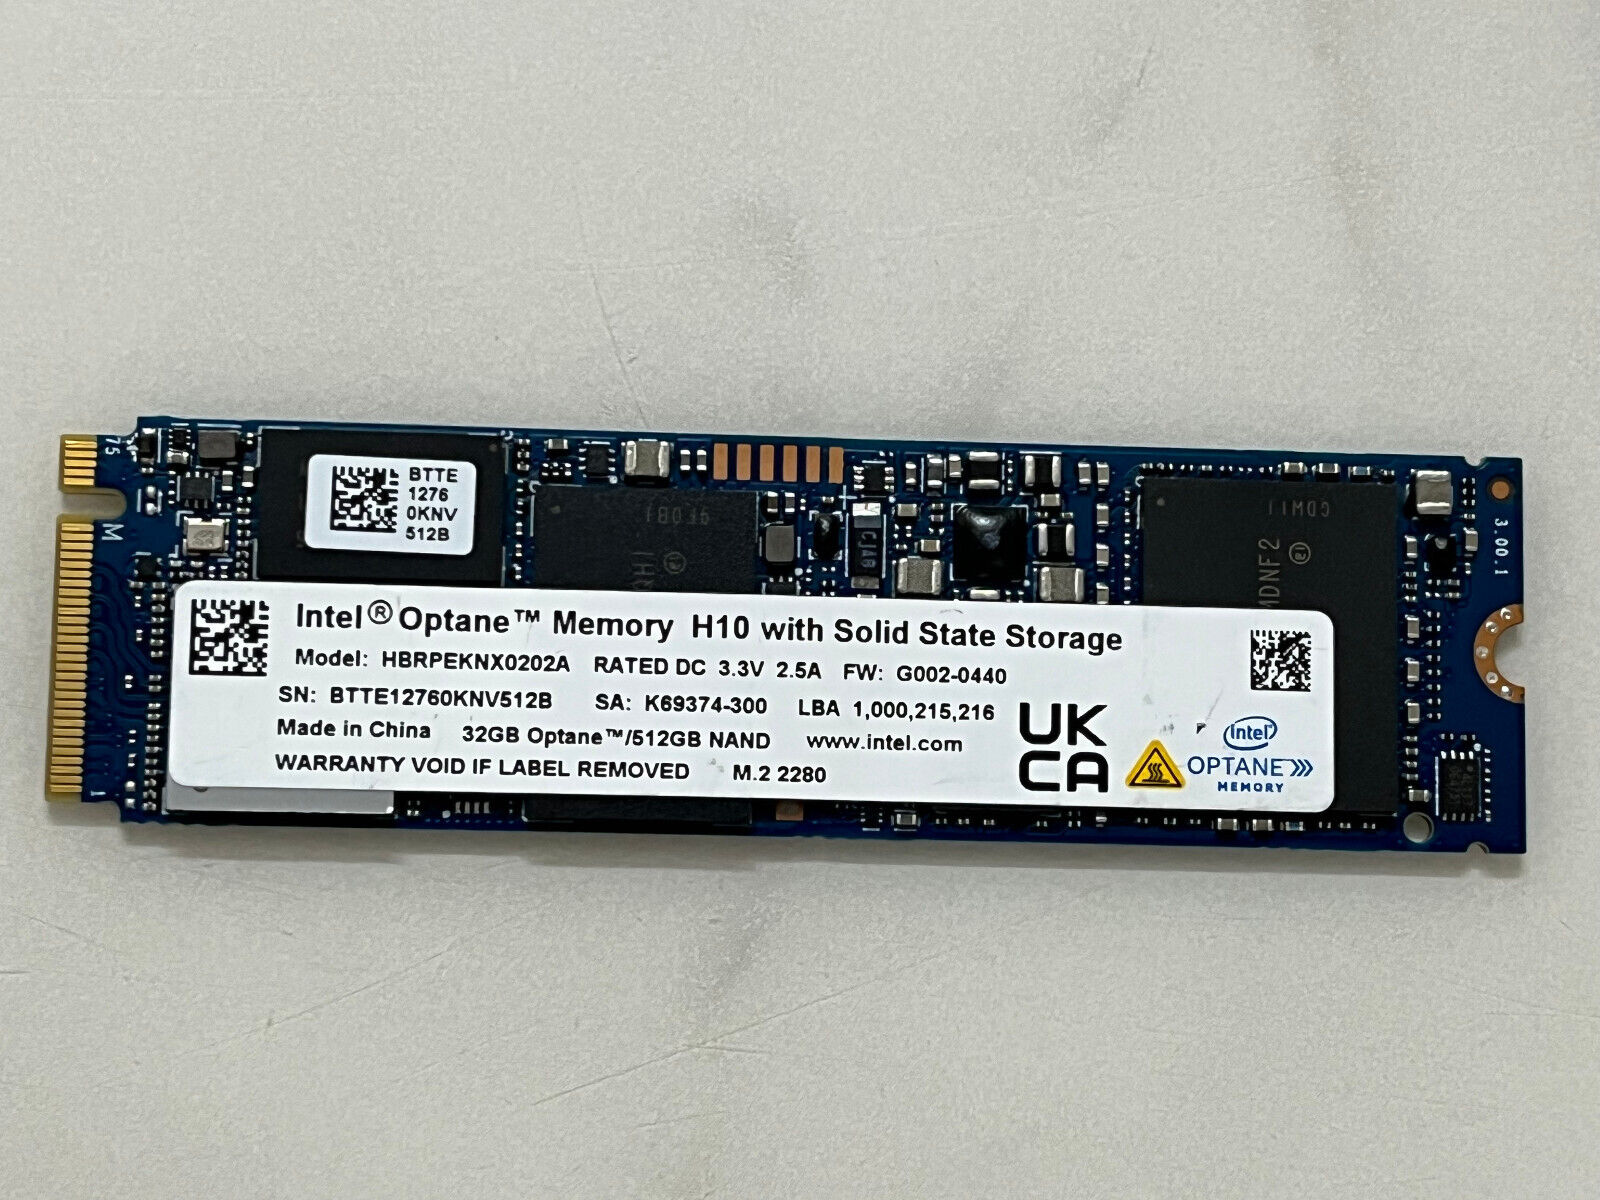 Intel Optane Memory H10 HBRPEKNX0202A 512GB+32GB NAND M.2 2280 Solid State Drive